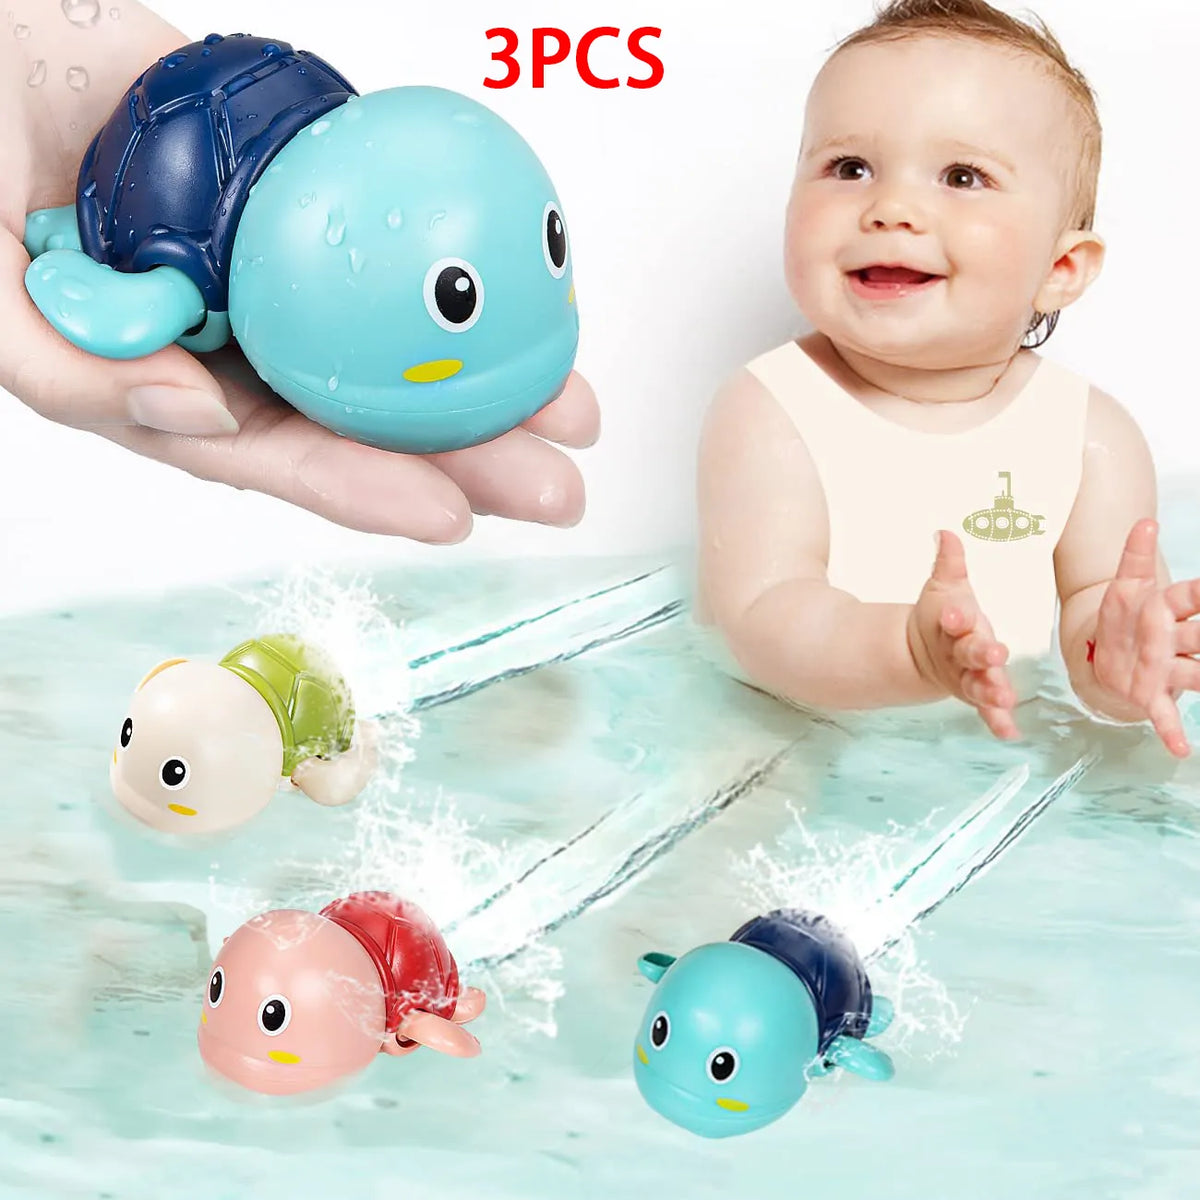 Wind-up Turtles for Bathtime Adventures! - For all baby